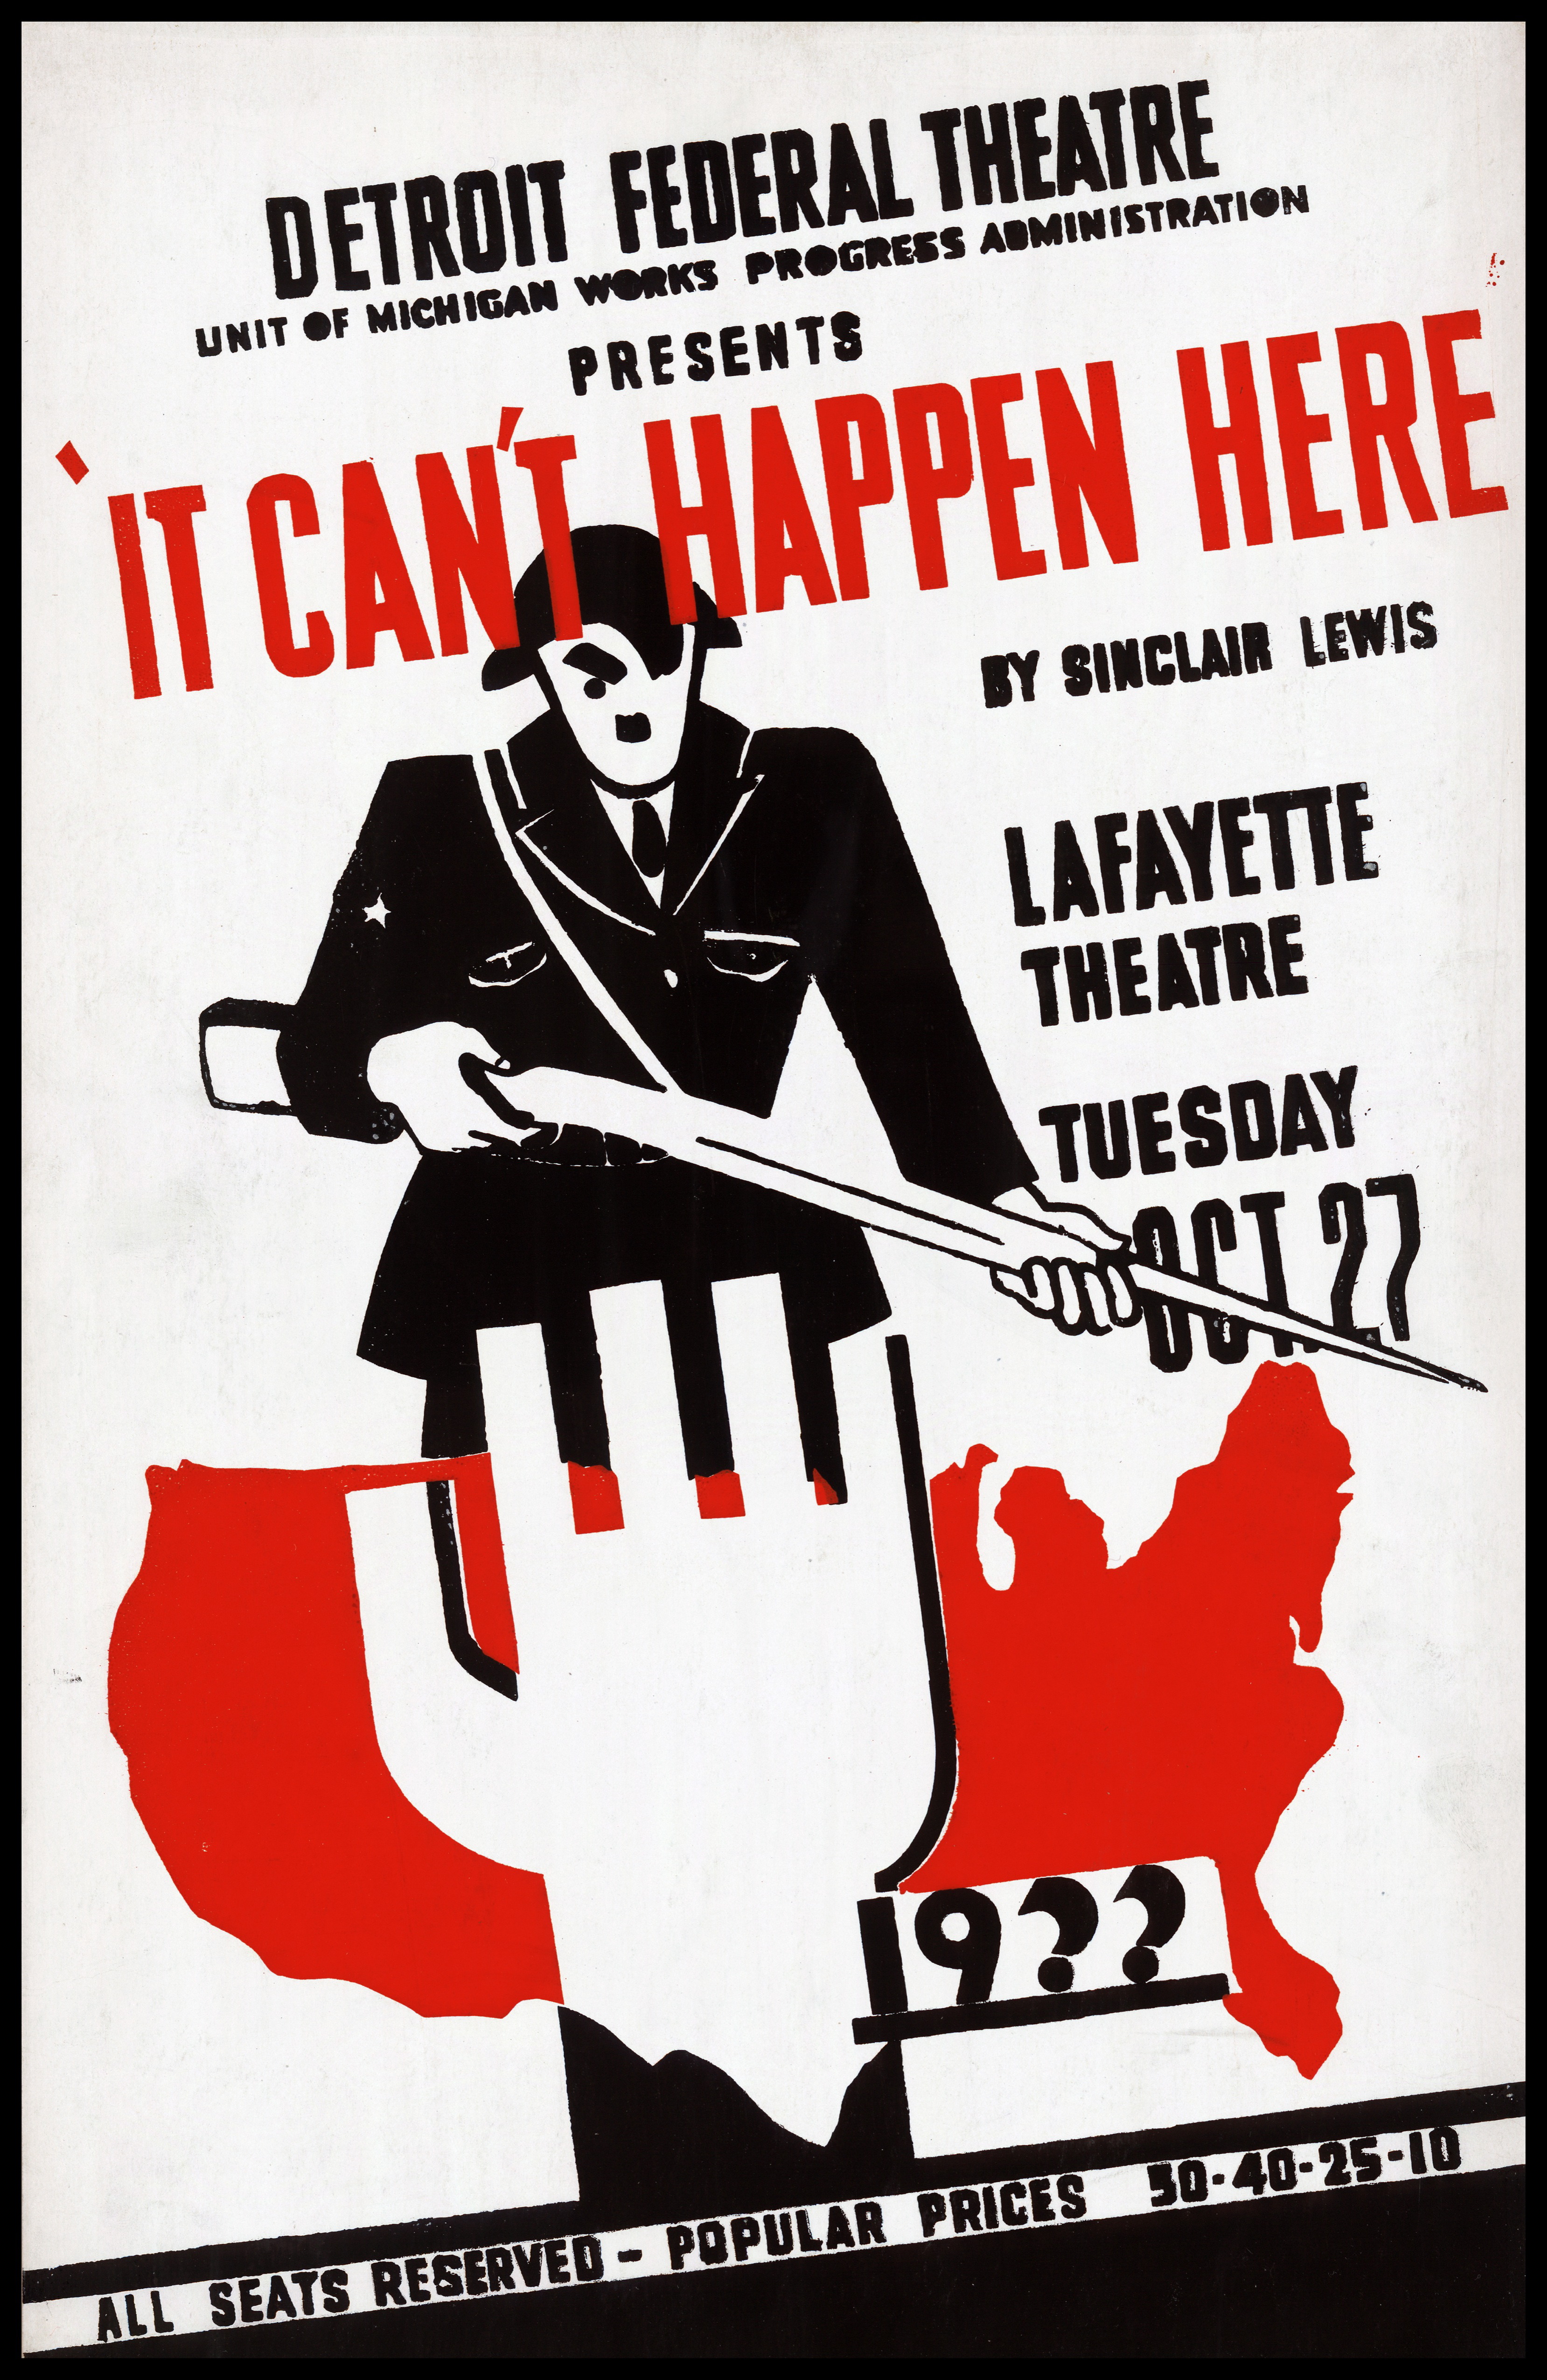 Detroit Federal Theatre Unit of Michigan Works Progress Administration presents <i>It Can't Happen Here</i> by Sinclair Lewis. (Universal History Archive—Getty Images)